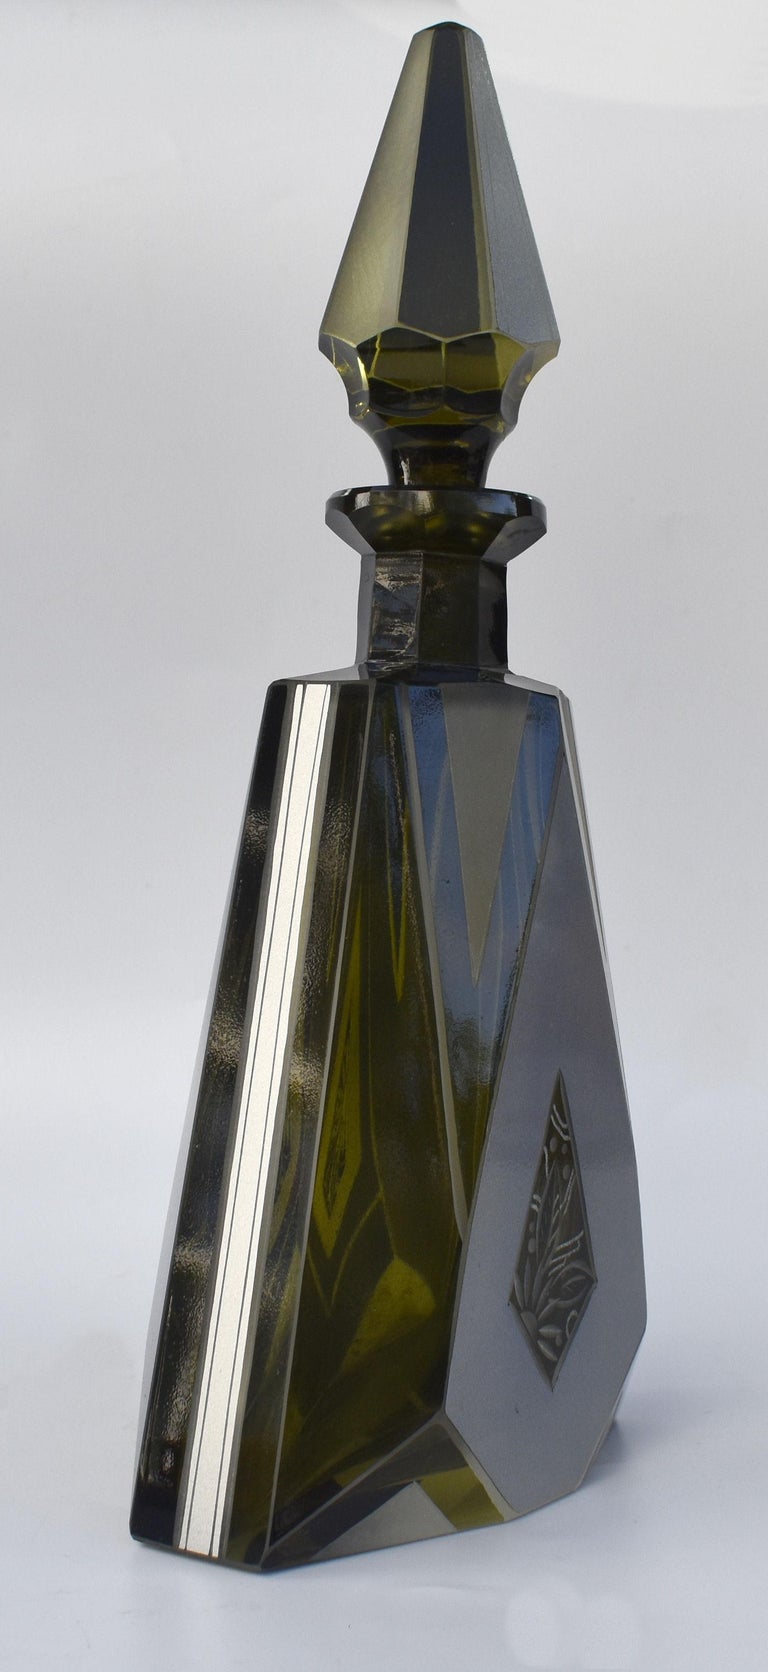 Wonderfully stylish is this Art Deco decanter set originating from Czech Republic, ideal for this time of year either to gift or impress your guests. Very high quality and striking looking. Features a angular shape decanter with stopper and six good